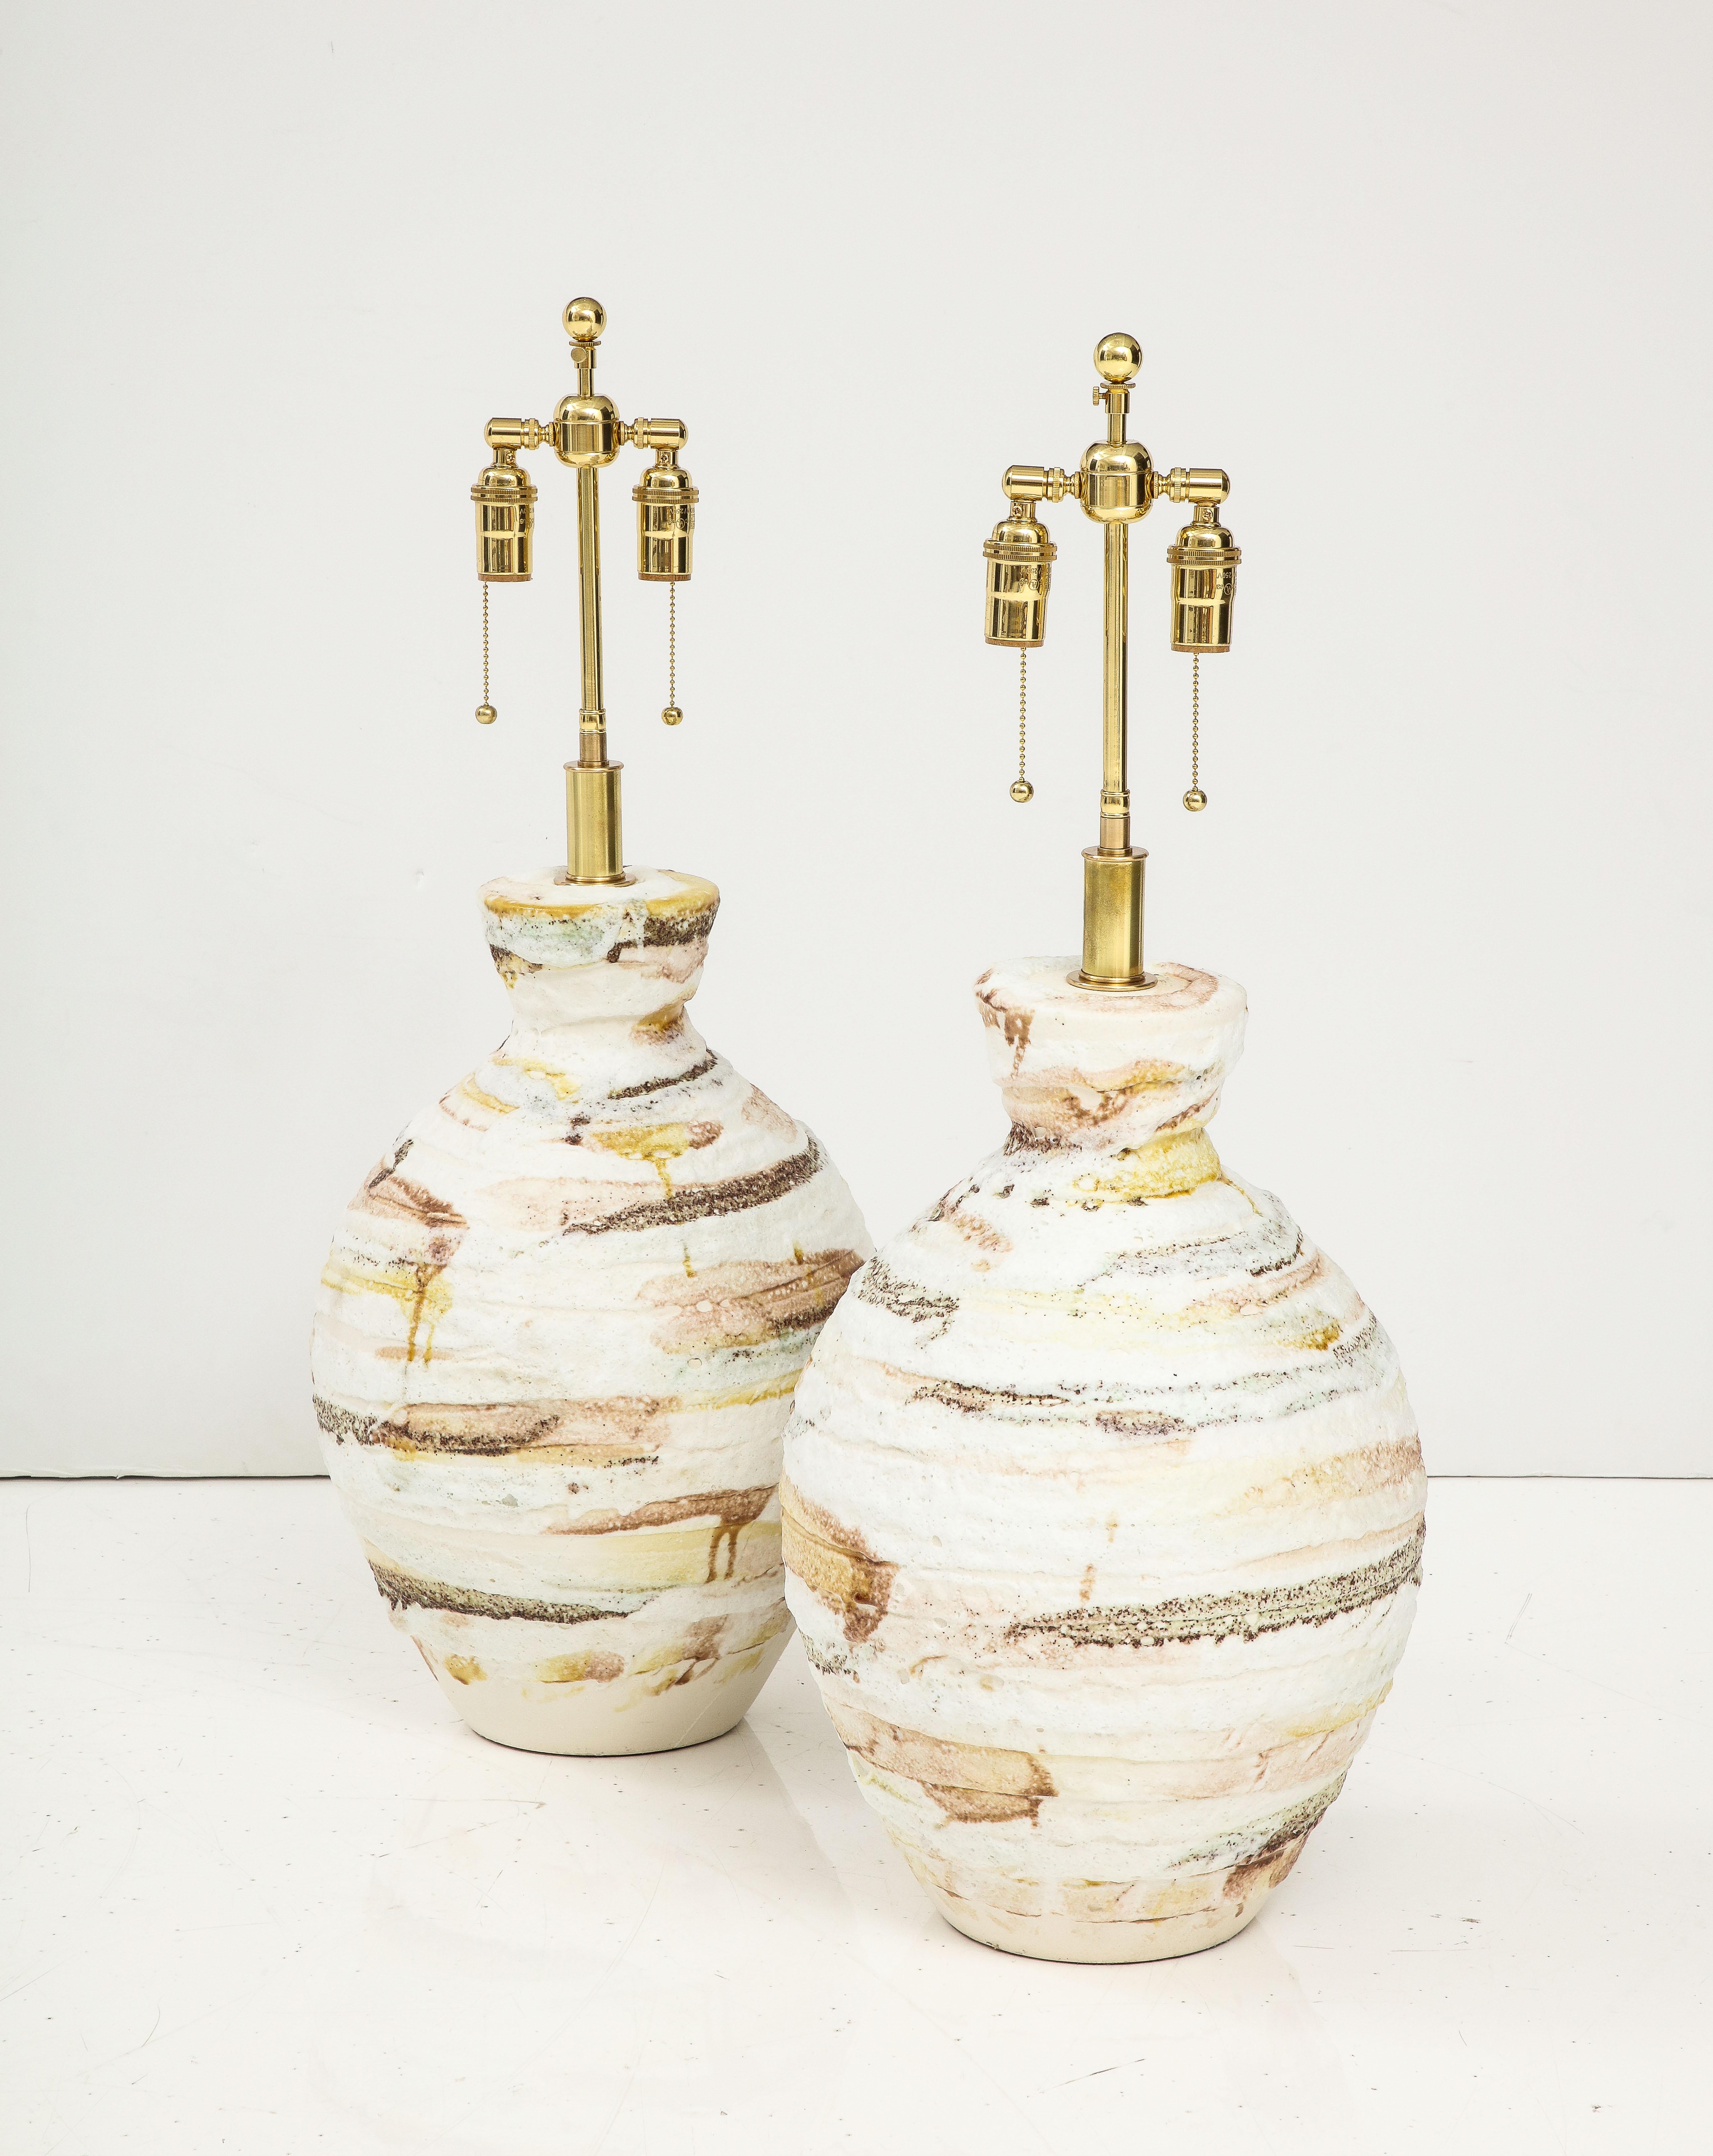 Pair of Large Italian Ceramic lamps with a volcanic textured finish.
The lamps have been Newly rewired with adjustable polished brass double
clusters that take standard size light bulbs and silk Rayon cords.
60 watts per socket 120 Watts Maximum per